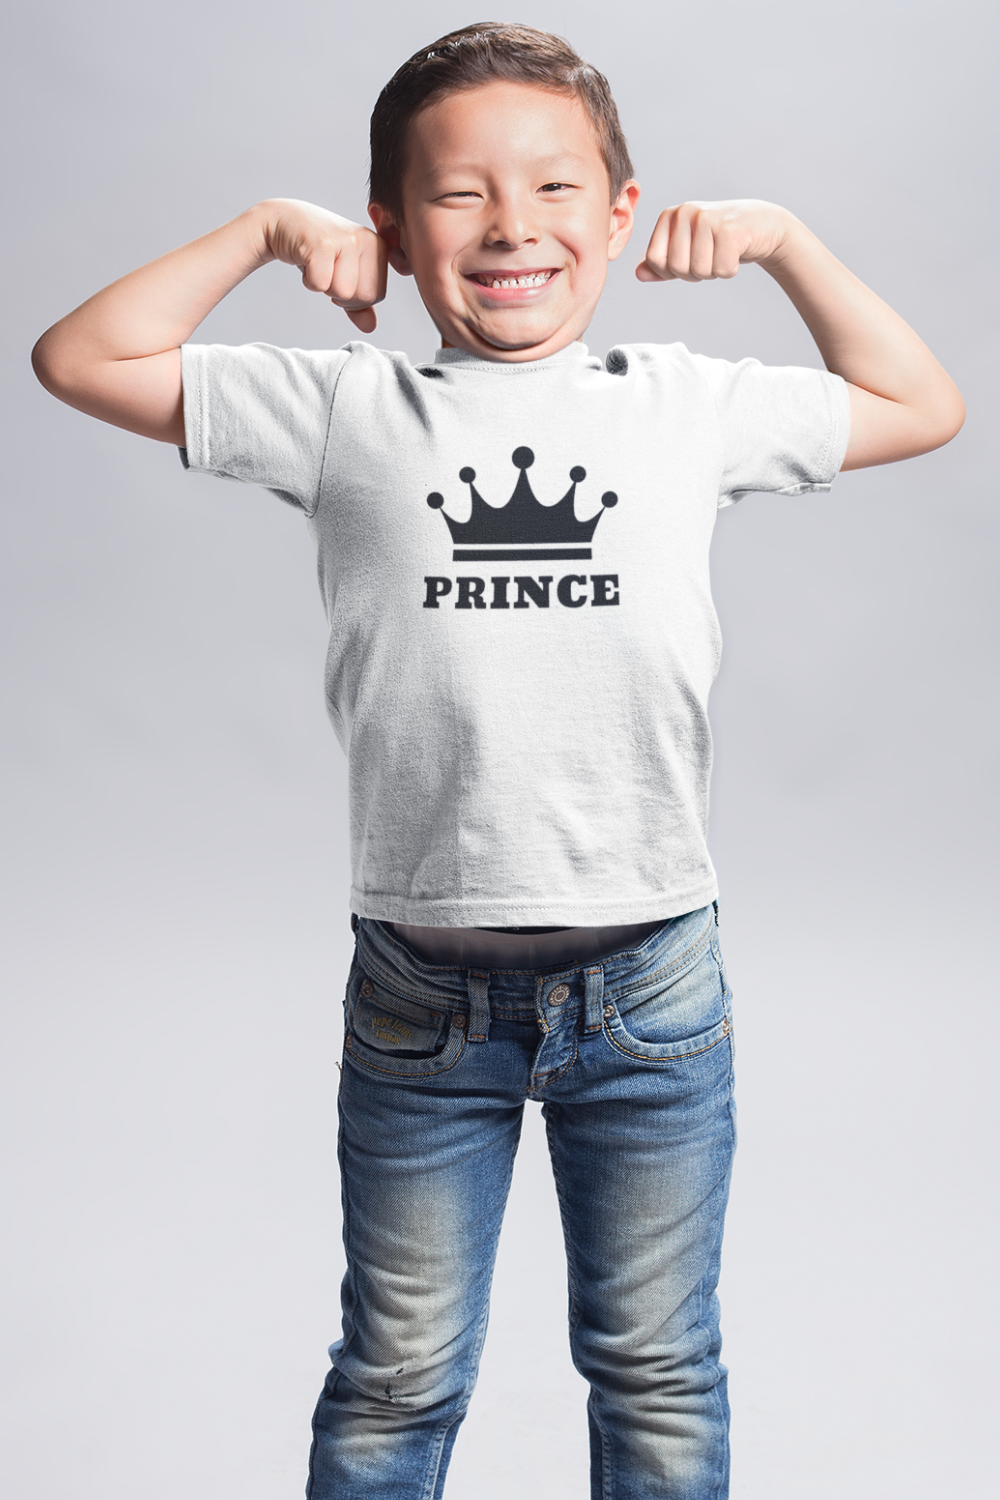 Prince Junior T-Shirt (100% Cotton) | Royal Family Collection